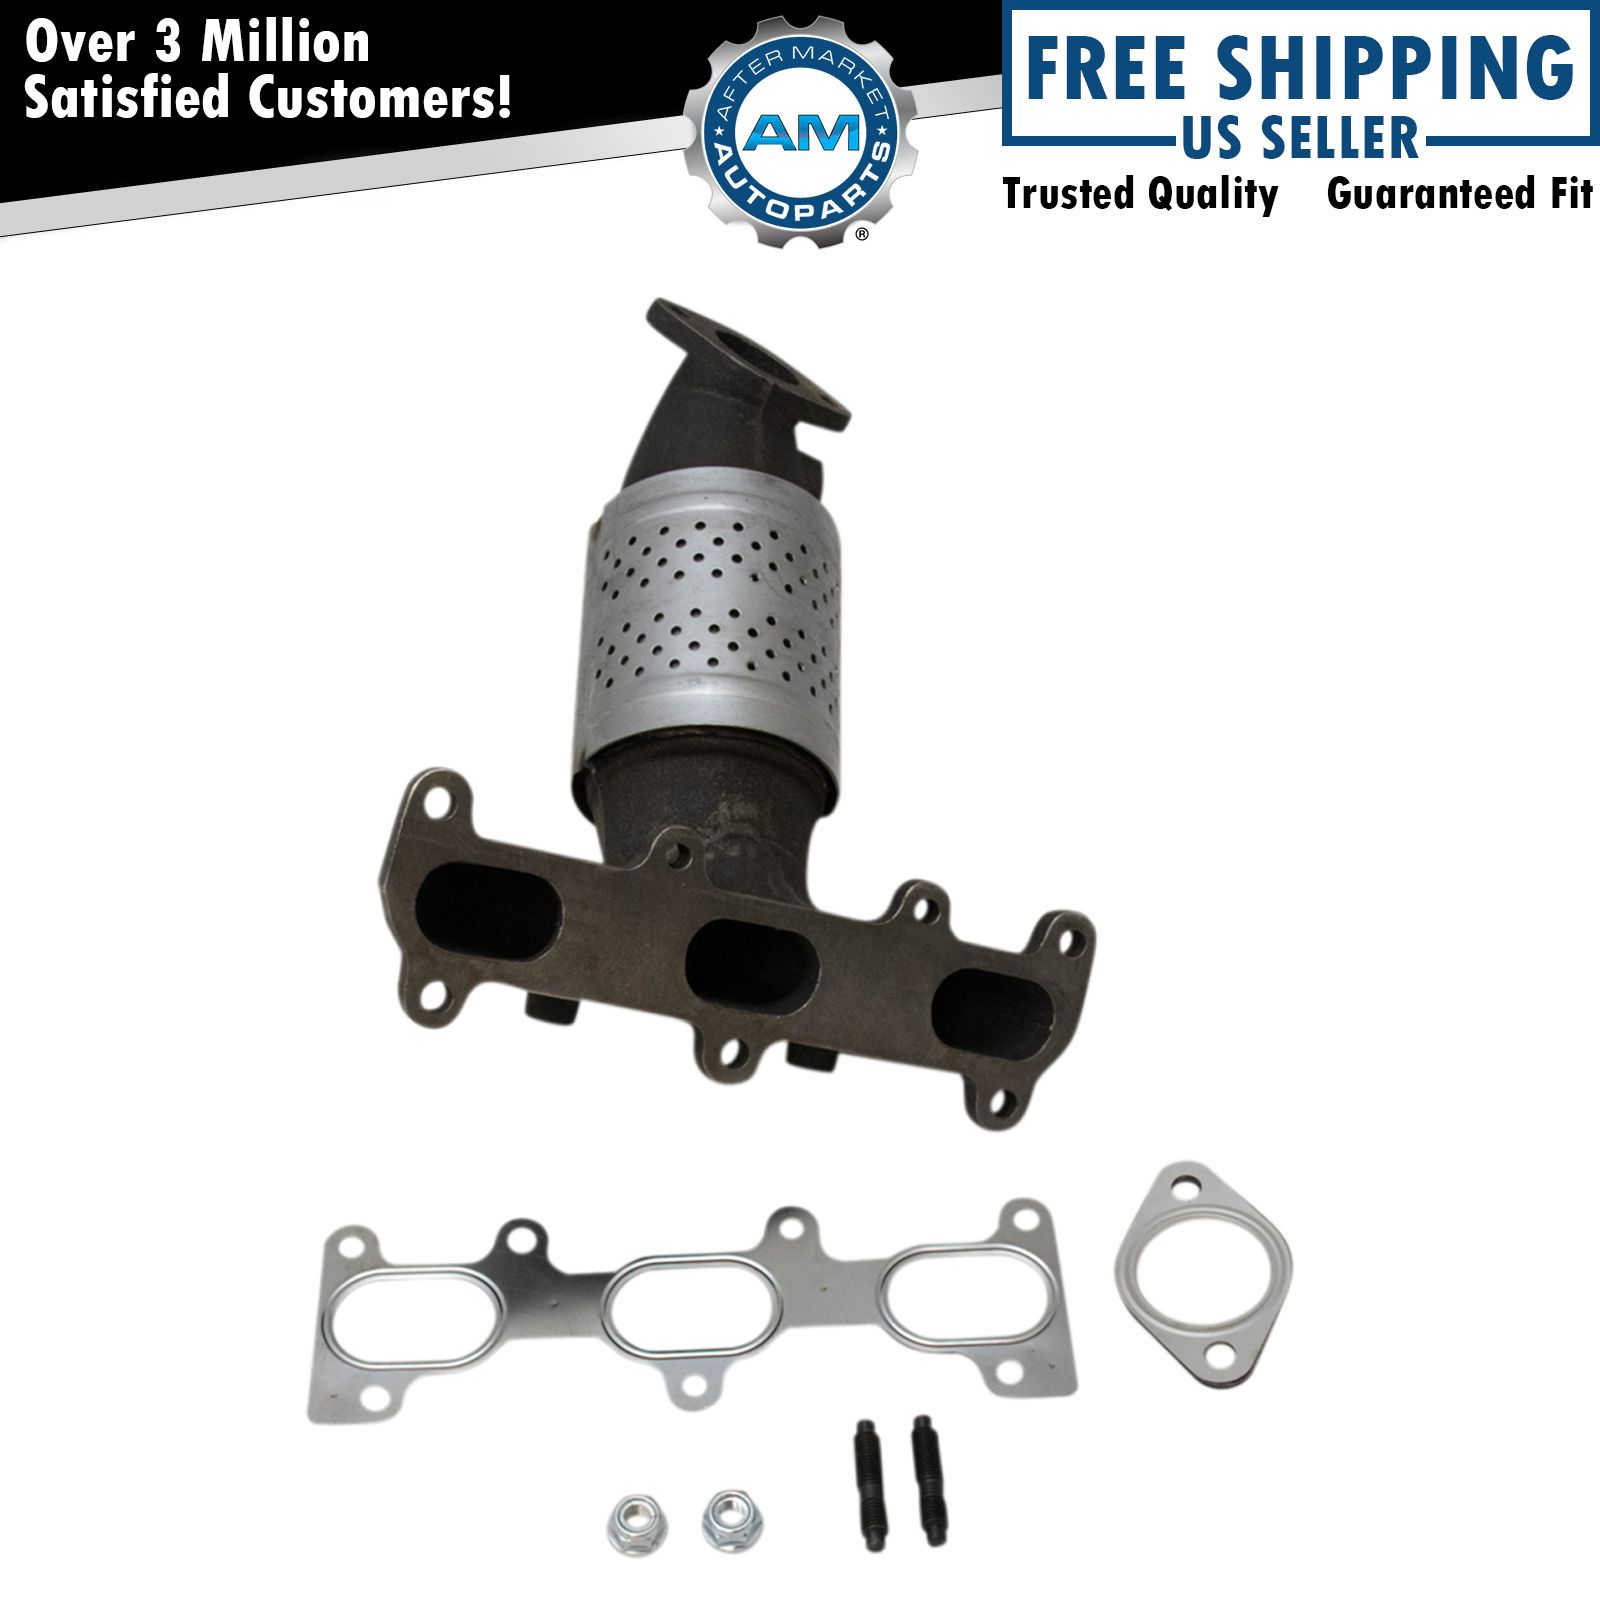 Front Exhaust Manifold & Catalytic Converter for Santa Fe Tucson Sportage